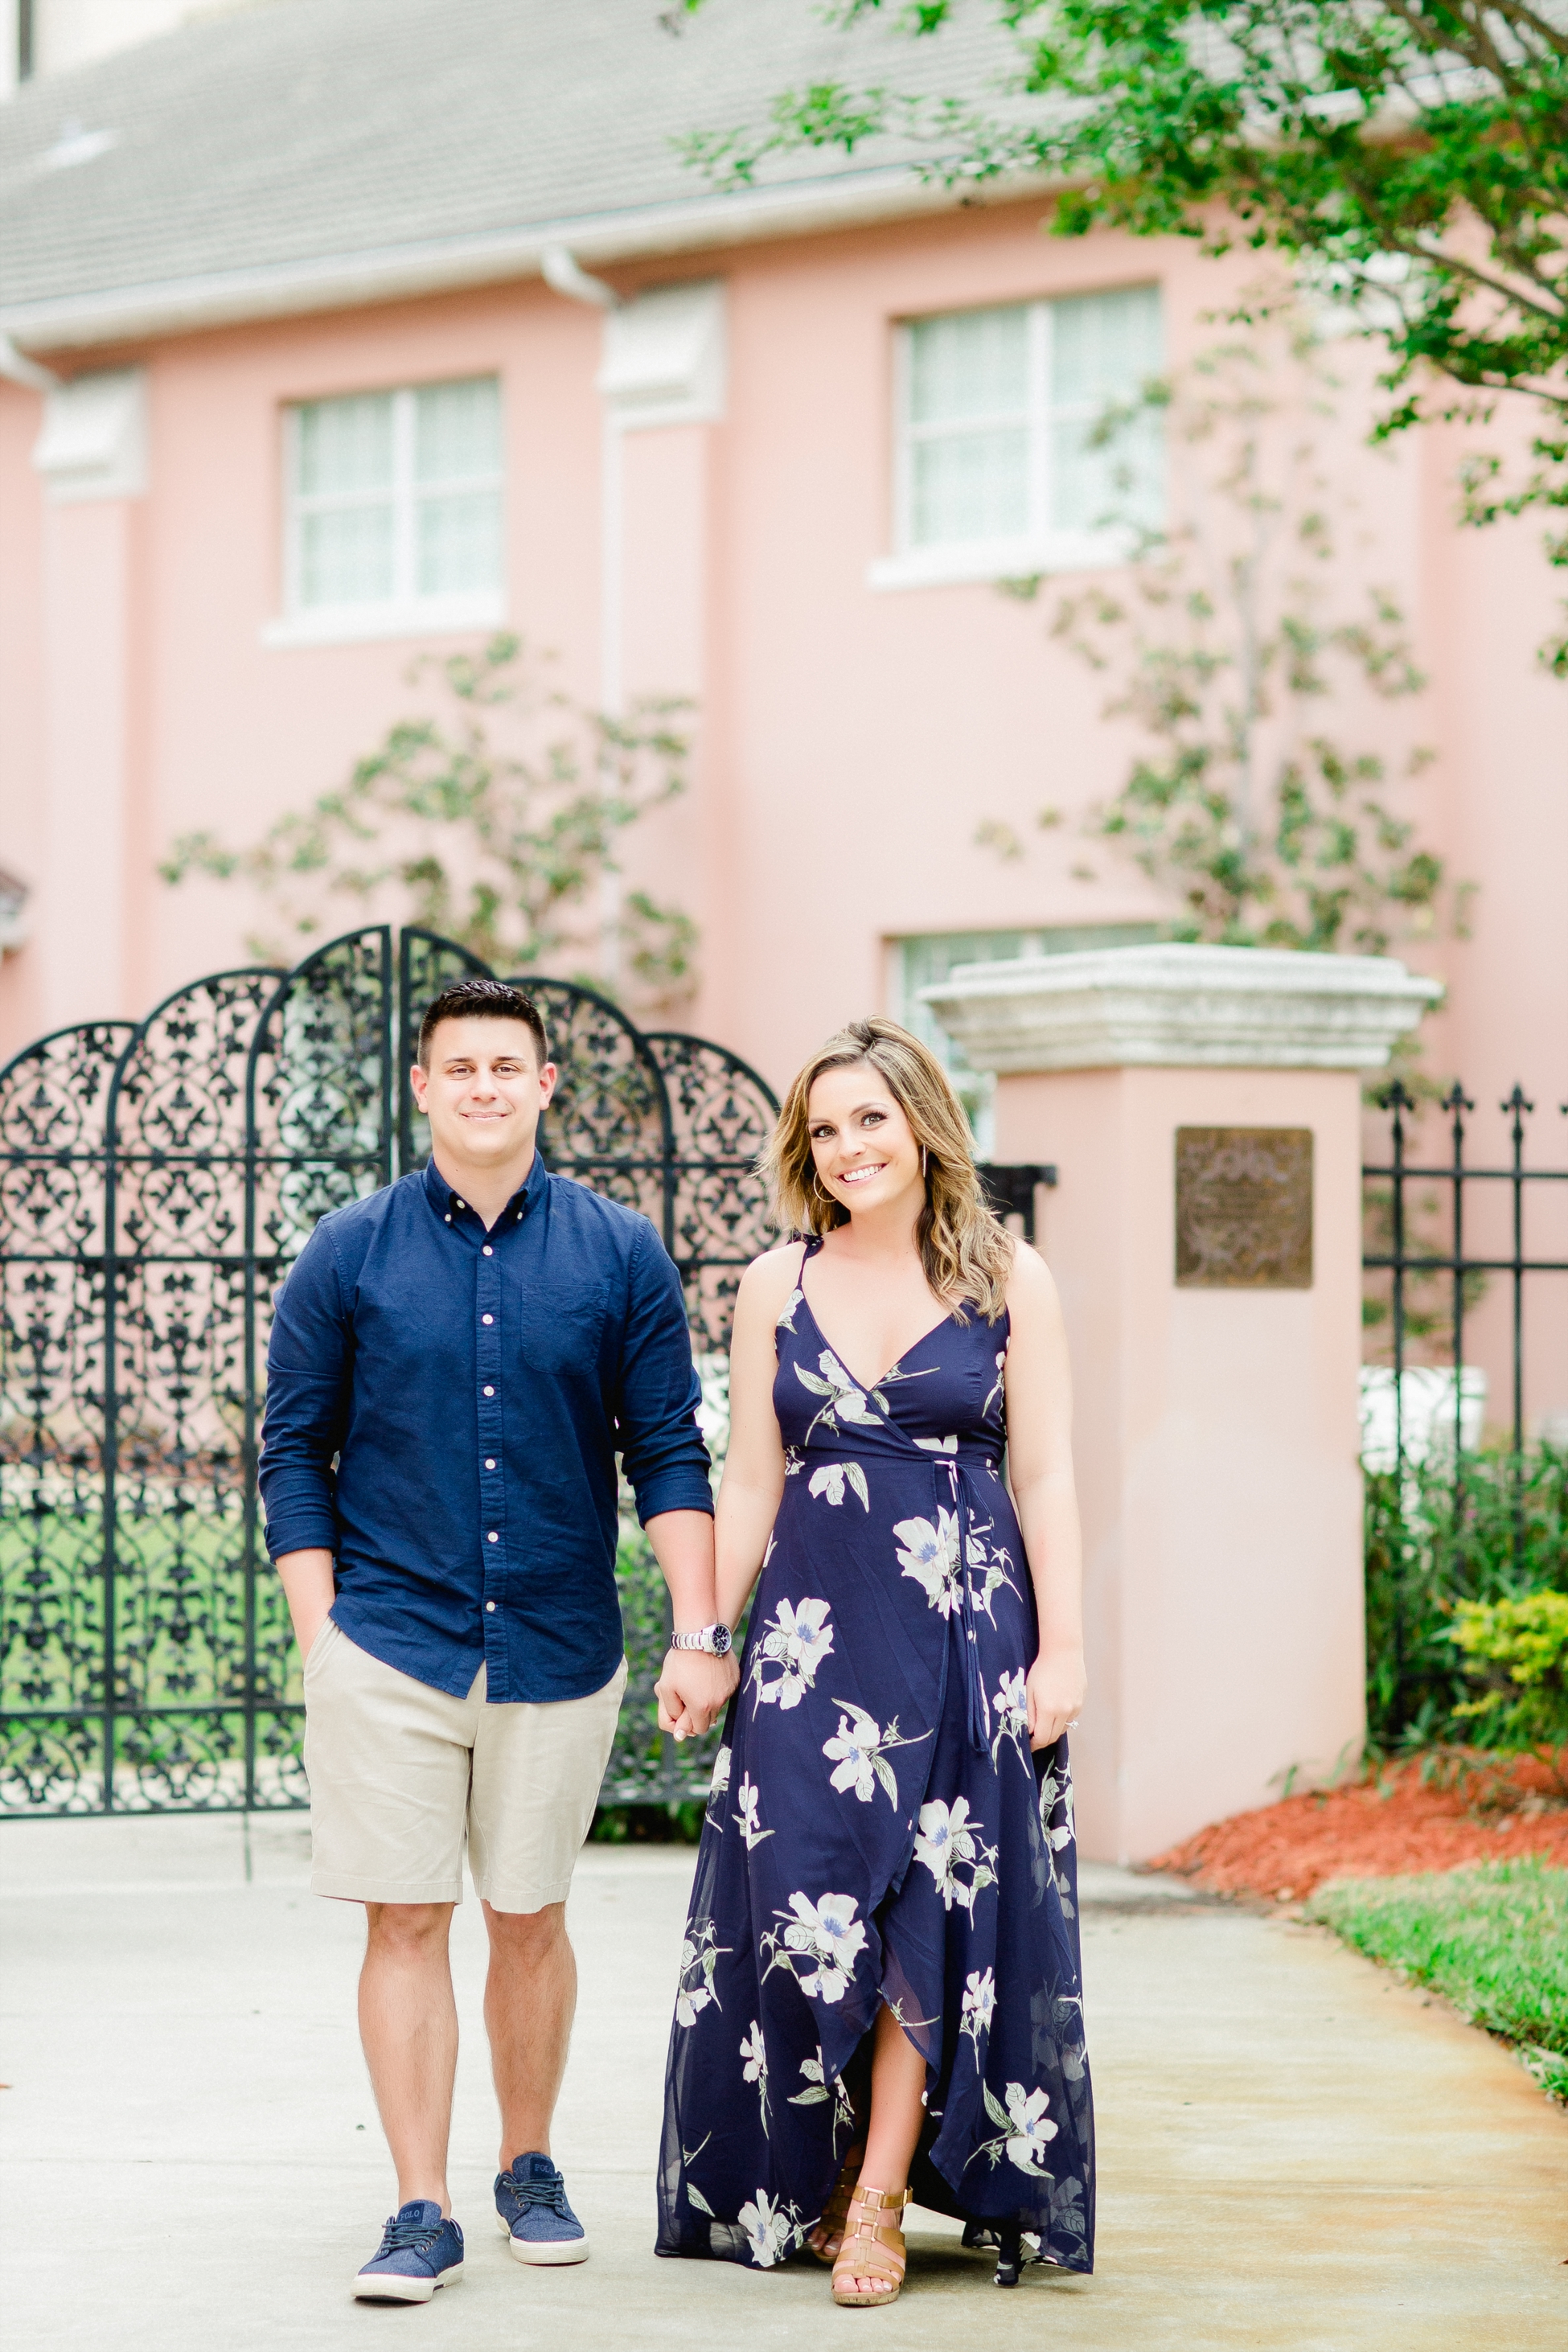 Clearwater Engagement | © Ailyn La Torre Photography 2018